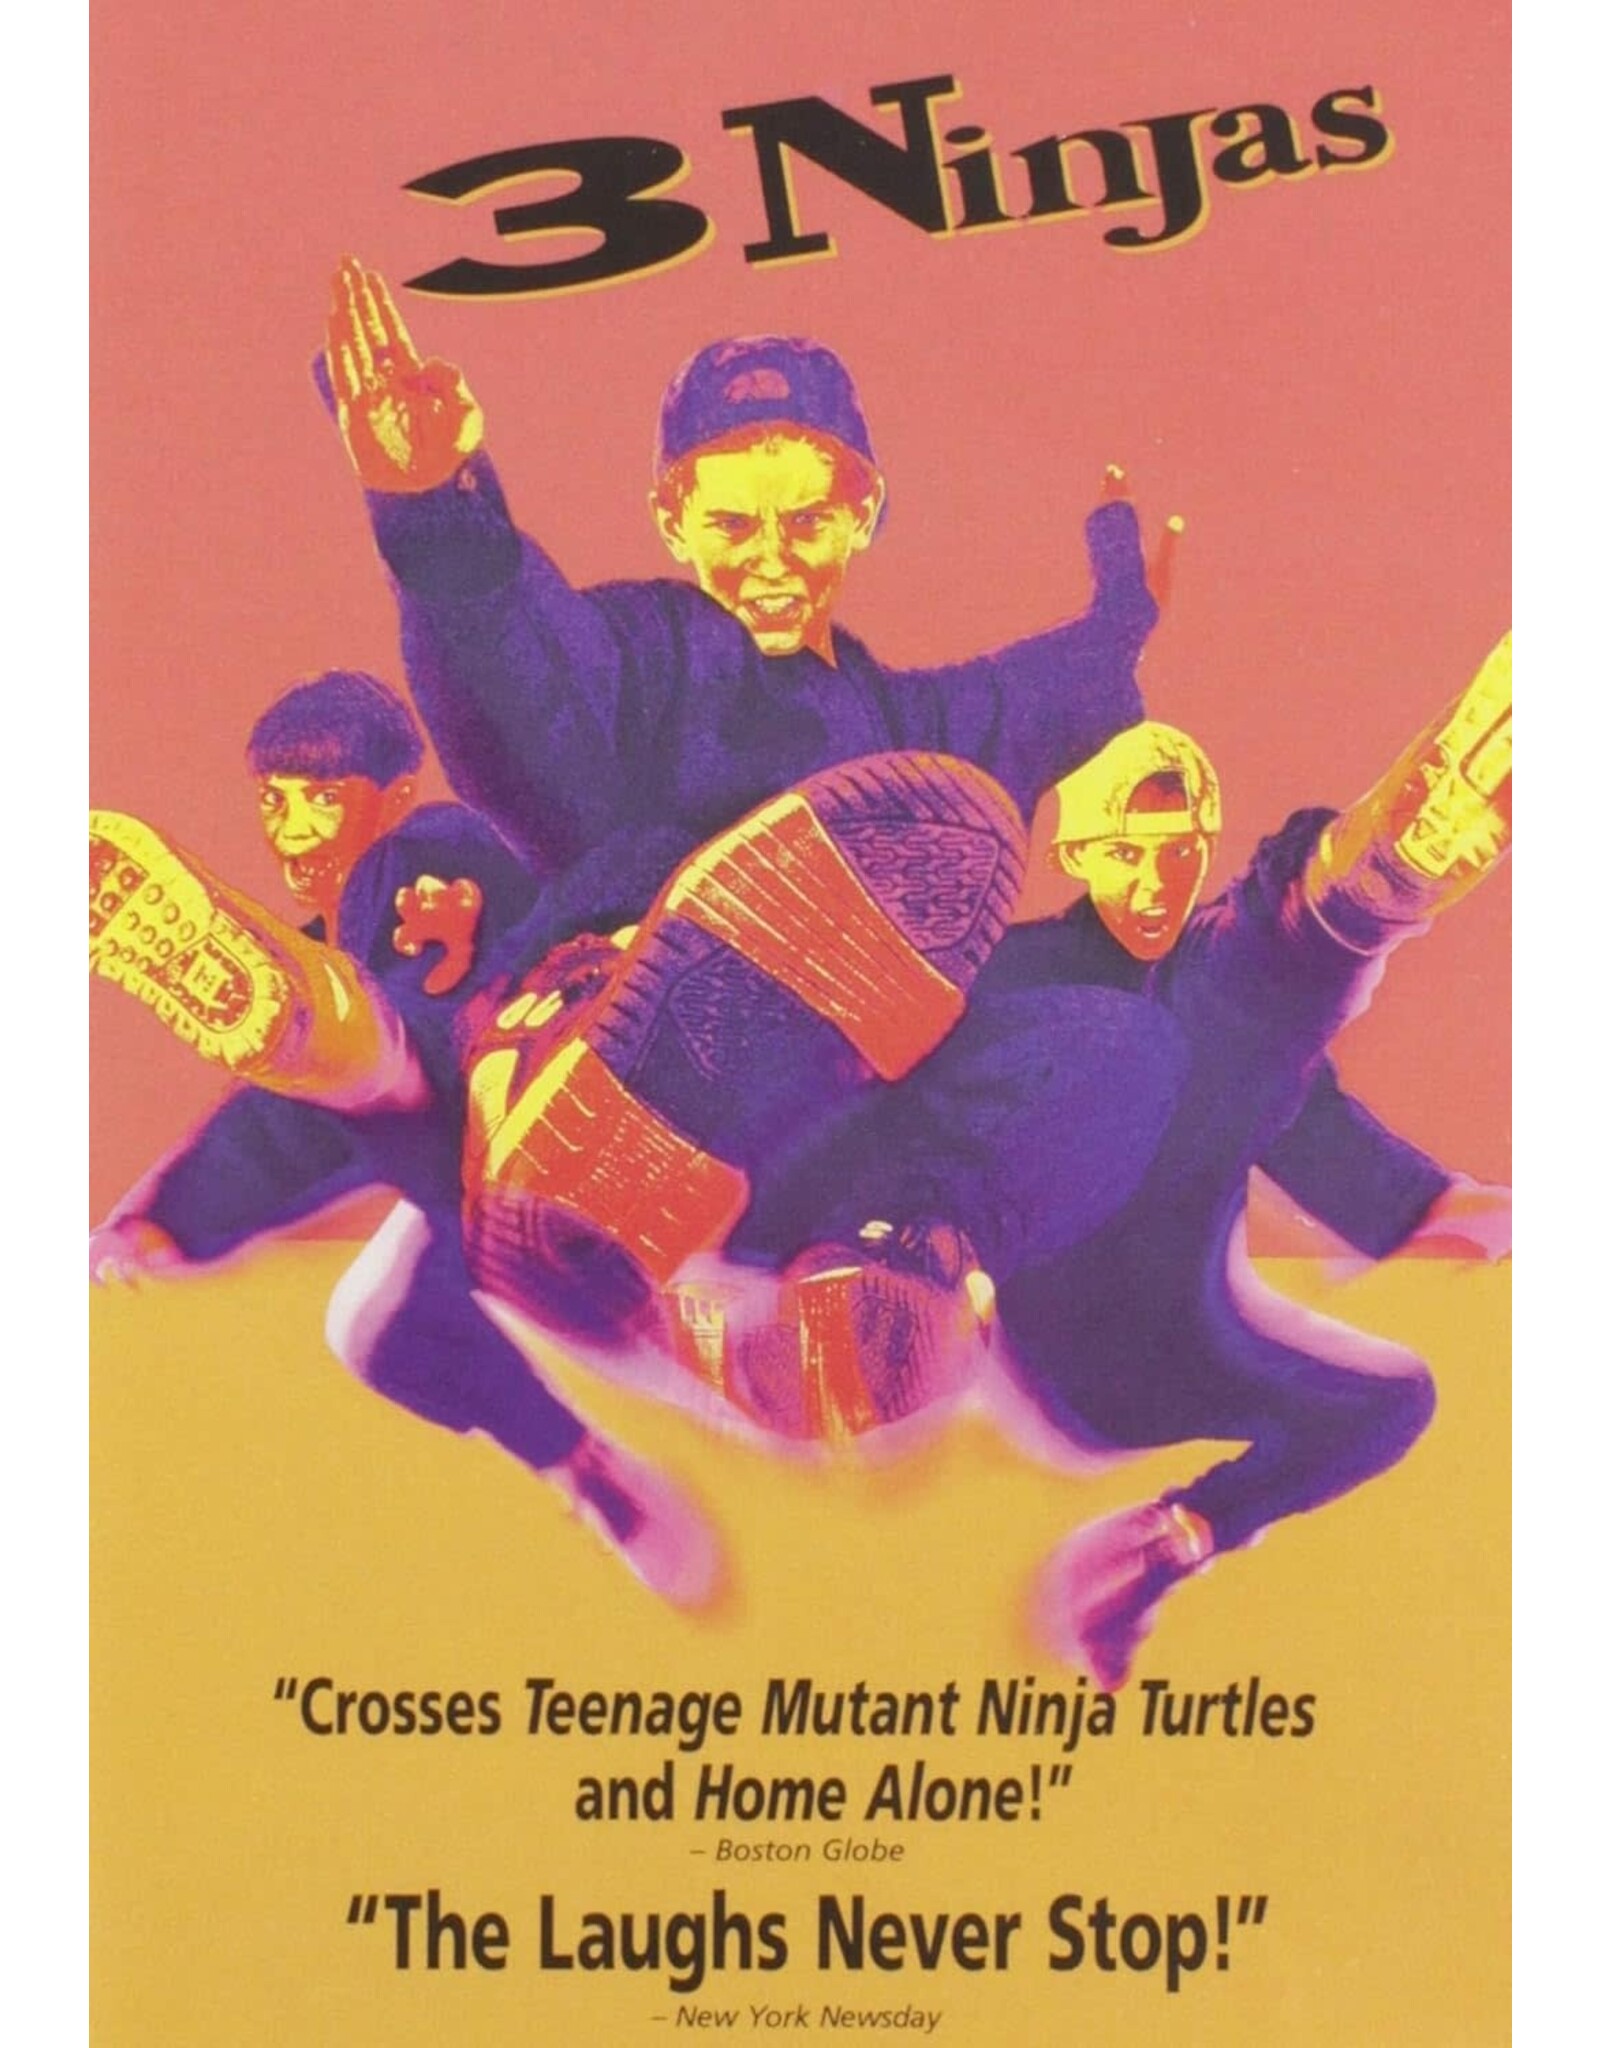 Cult and Cool 3 Ninjas (Used)